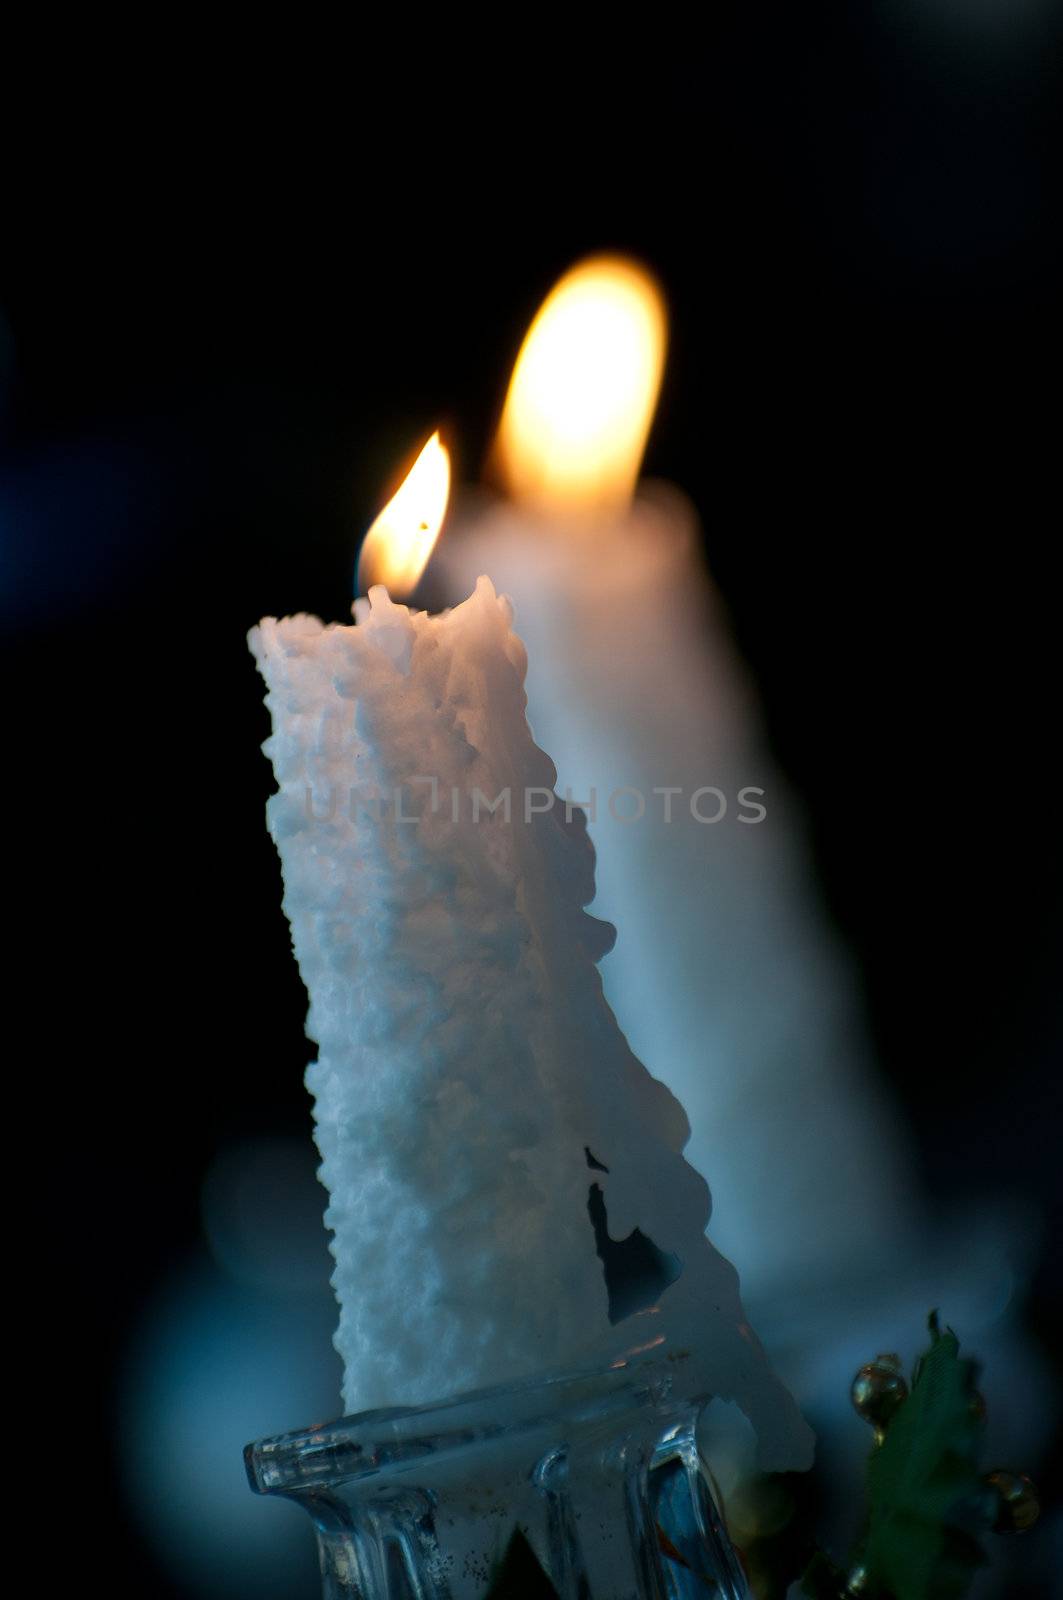 Burning candle against other blur candle